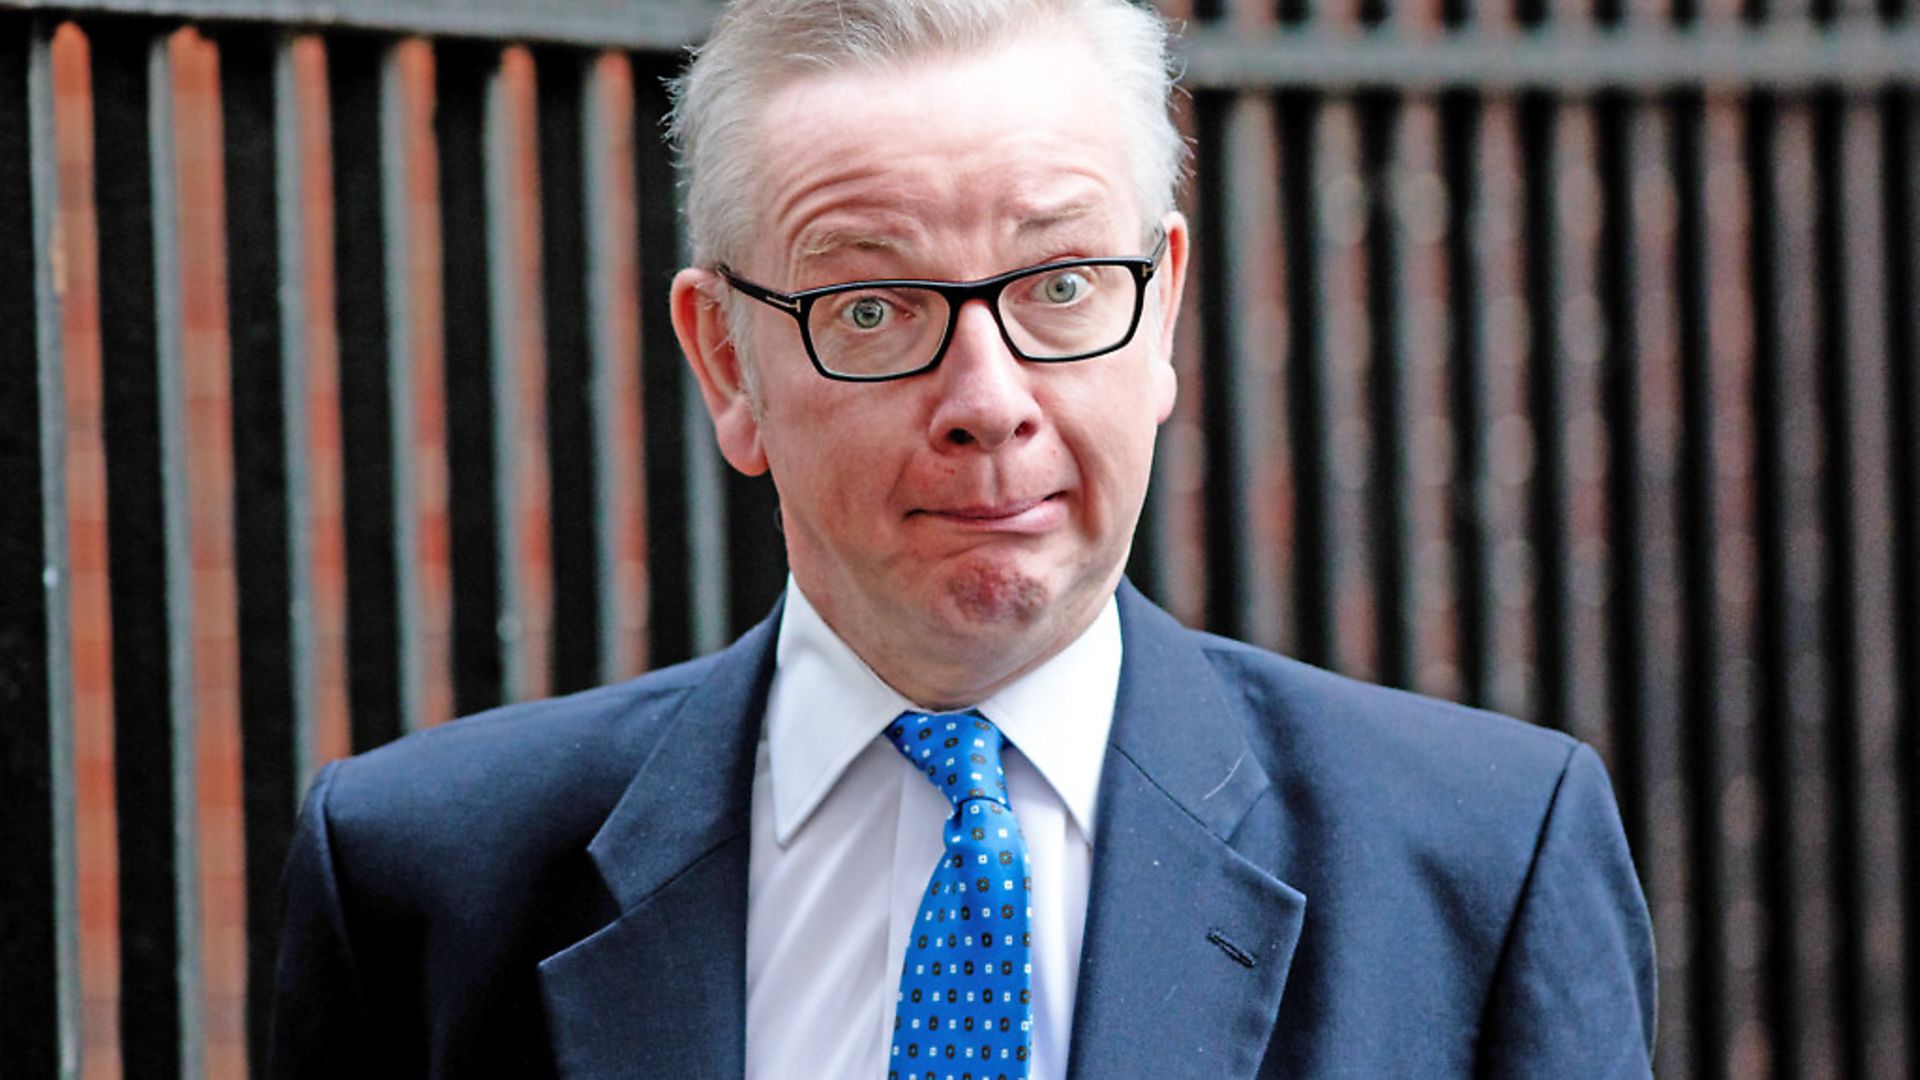 Tory leadership hopeful Michael Gove, who confessed to having used cocaine. Picture: Jack Taylor/Getty Images - Credit: Getty Images